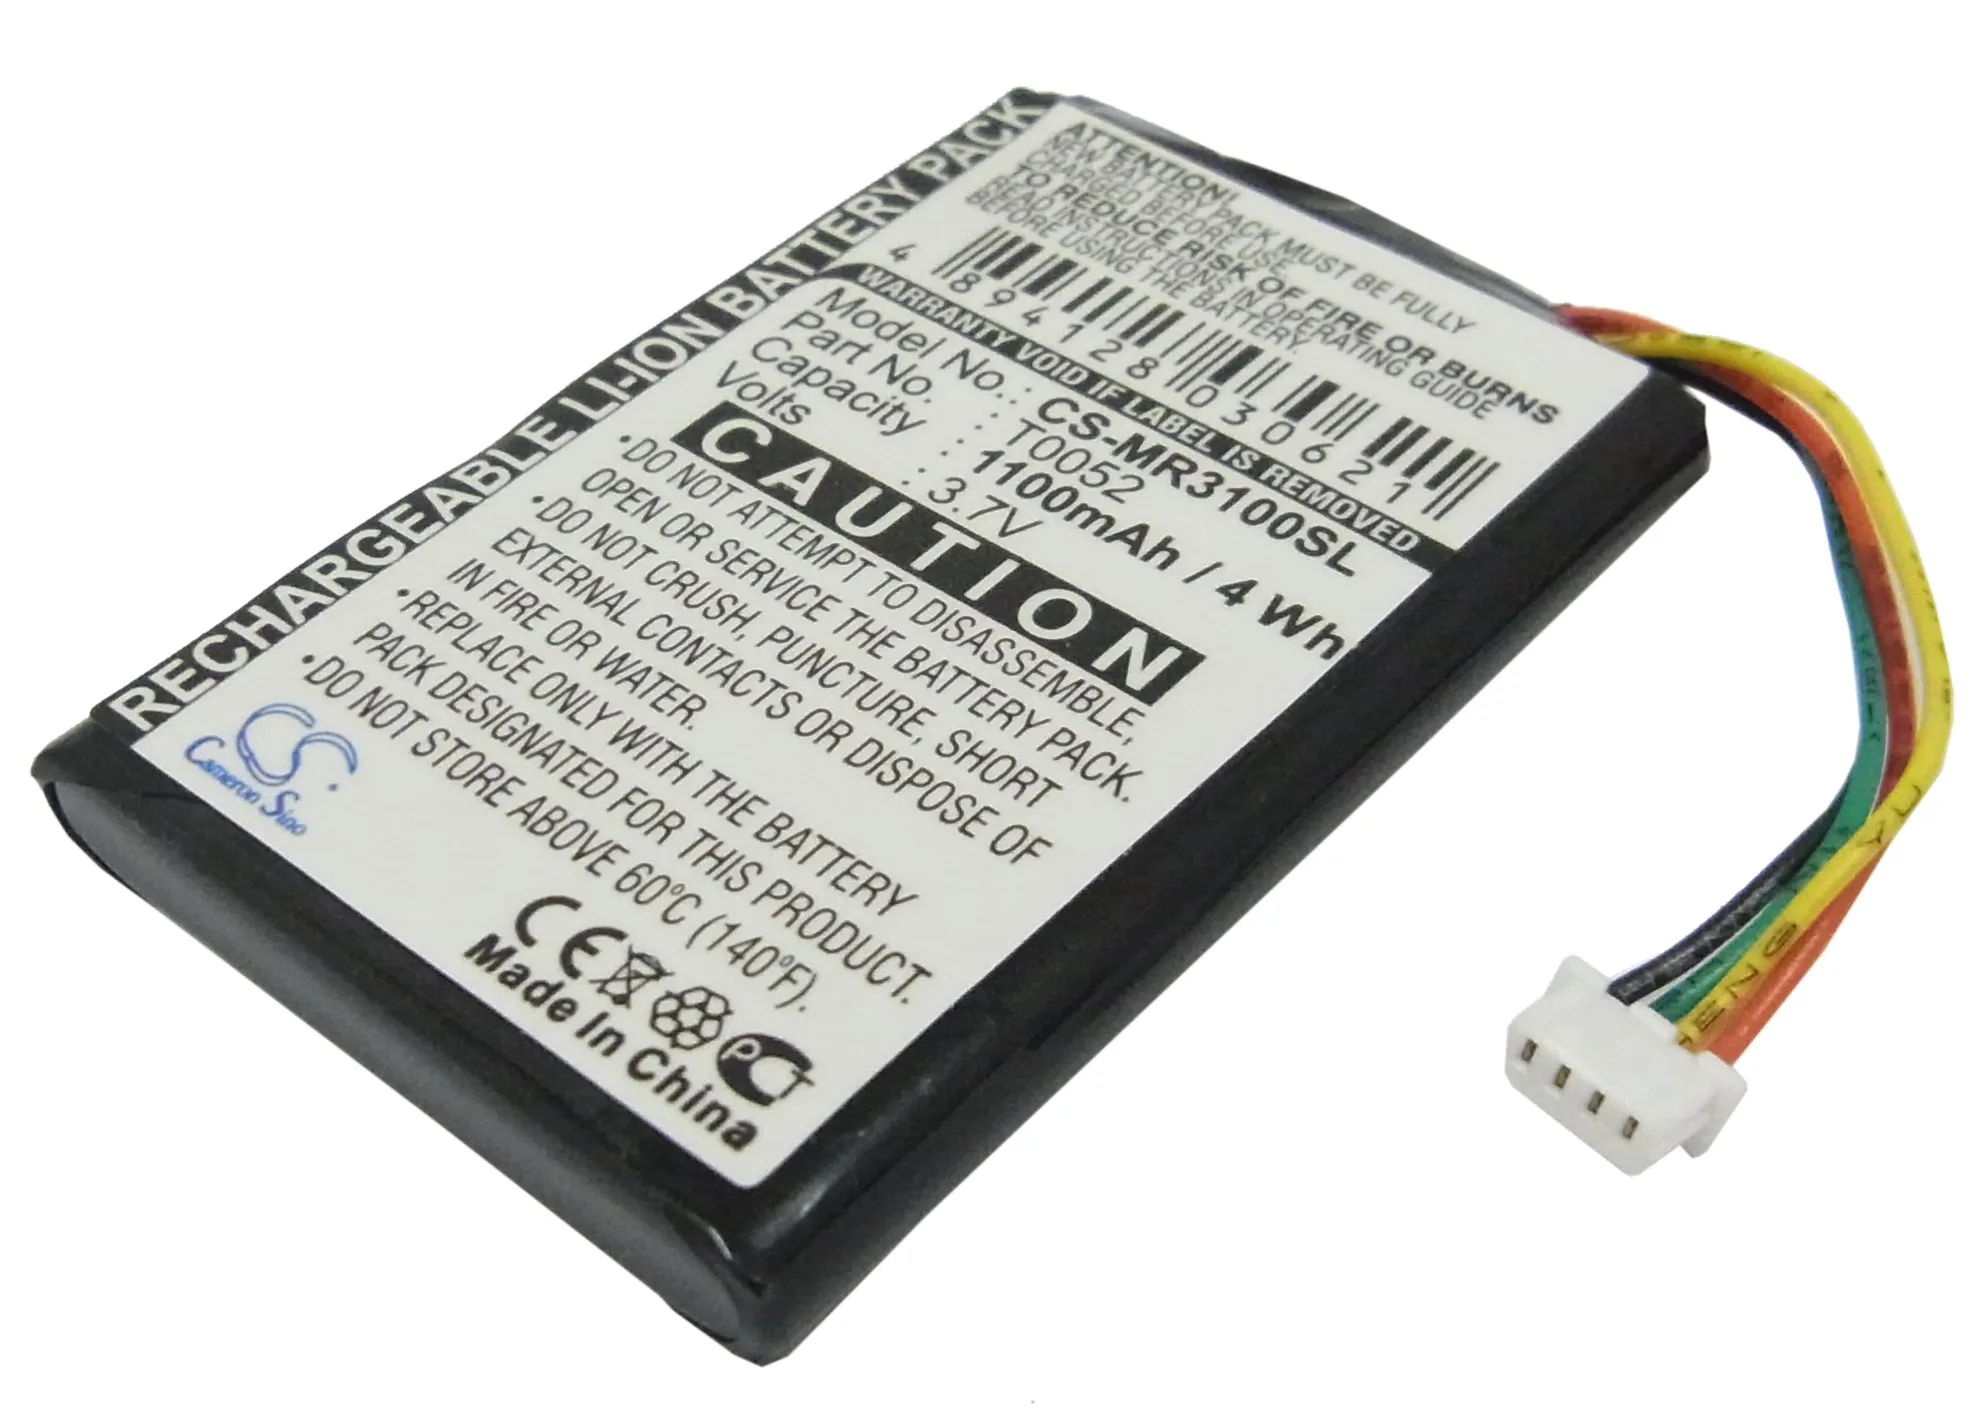 

CameronSino Battery for Magellan Maestro 3000 3200 3210 3220 3225 3250 RoadMate 1200 (4 wires) 1210 (4 wires) 1100mAh T0052